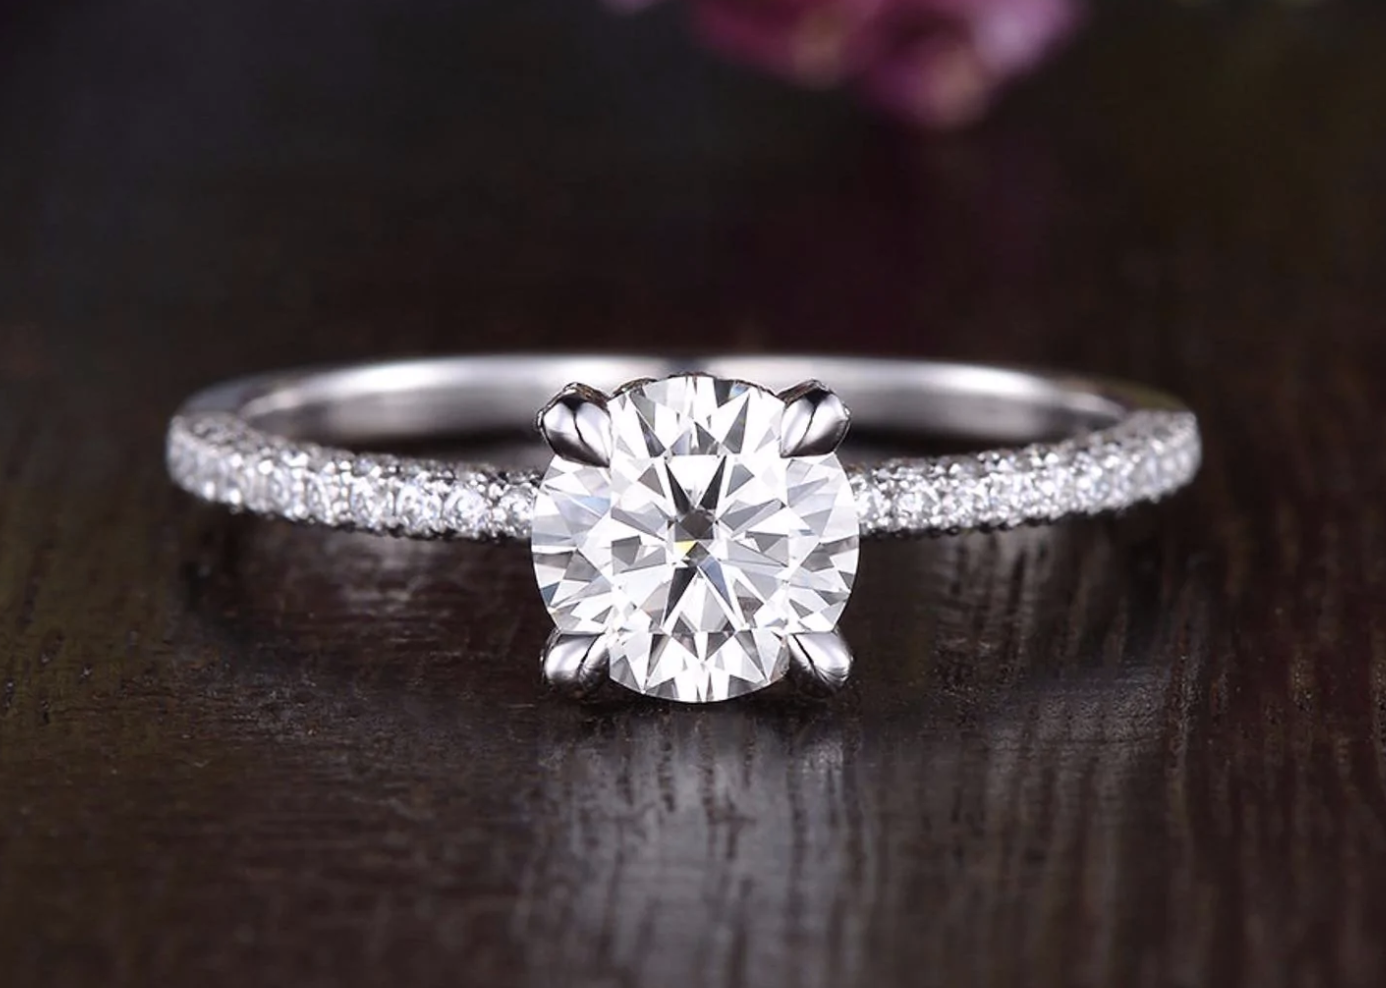 How to Find Out What Engagement Ring Your Partner Wants (Secretly!)